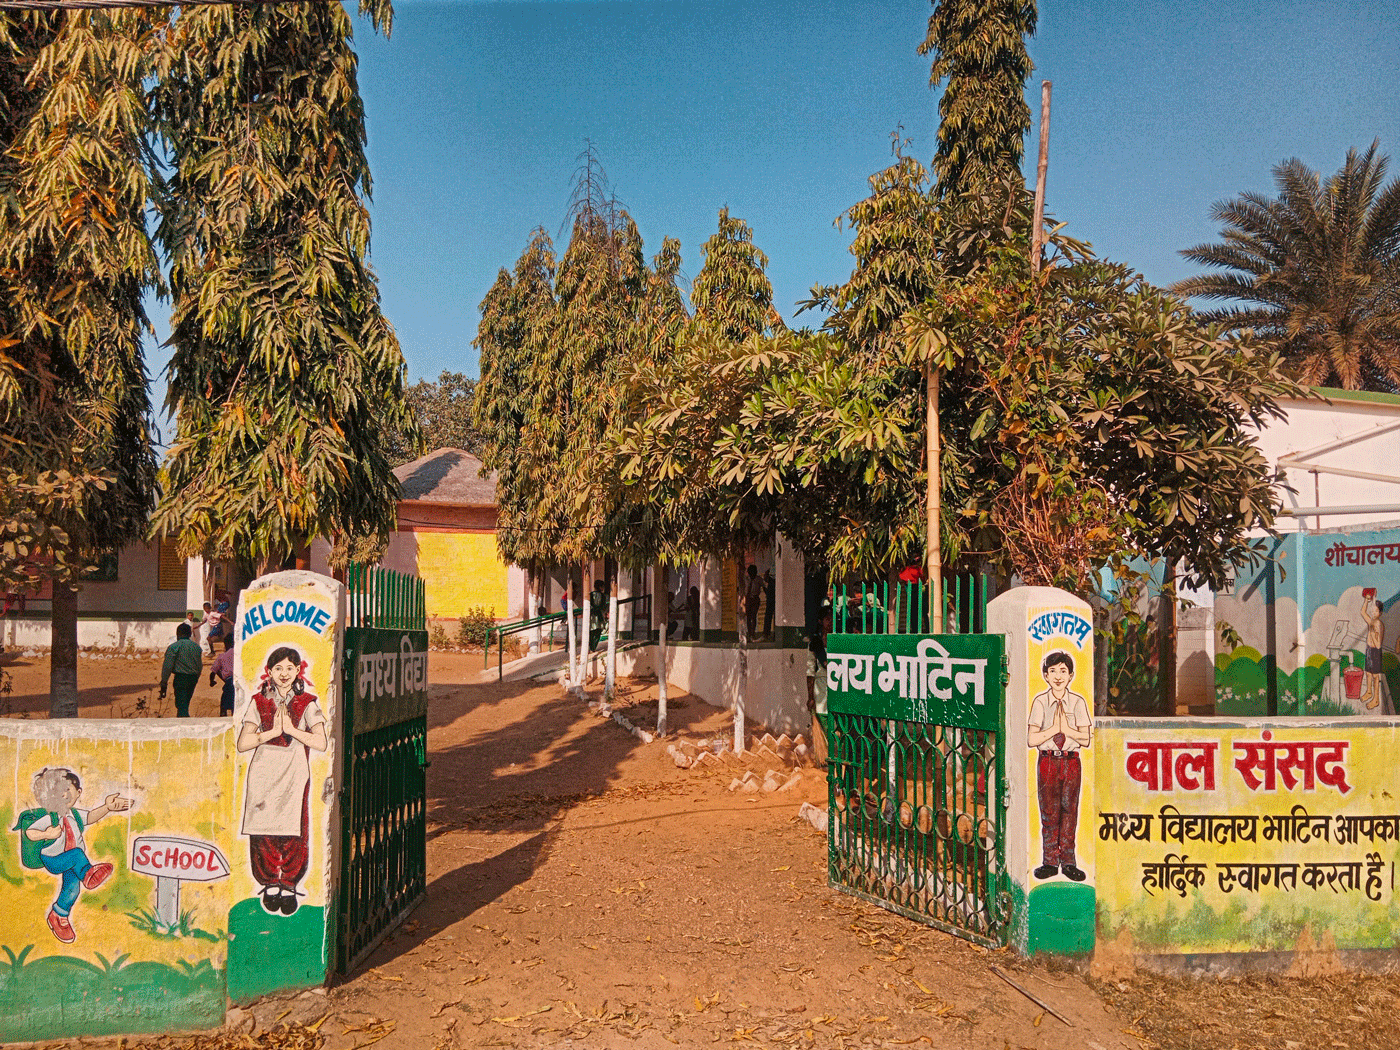 The entrance of Bhatin Middle School